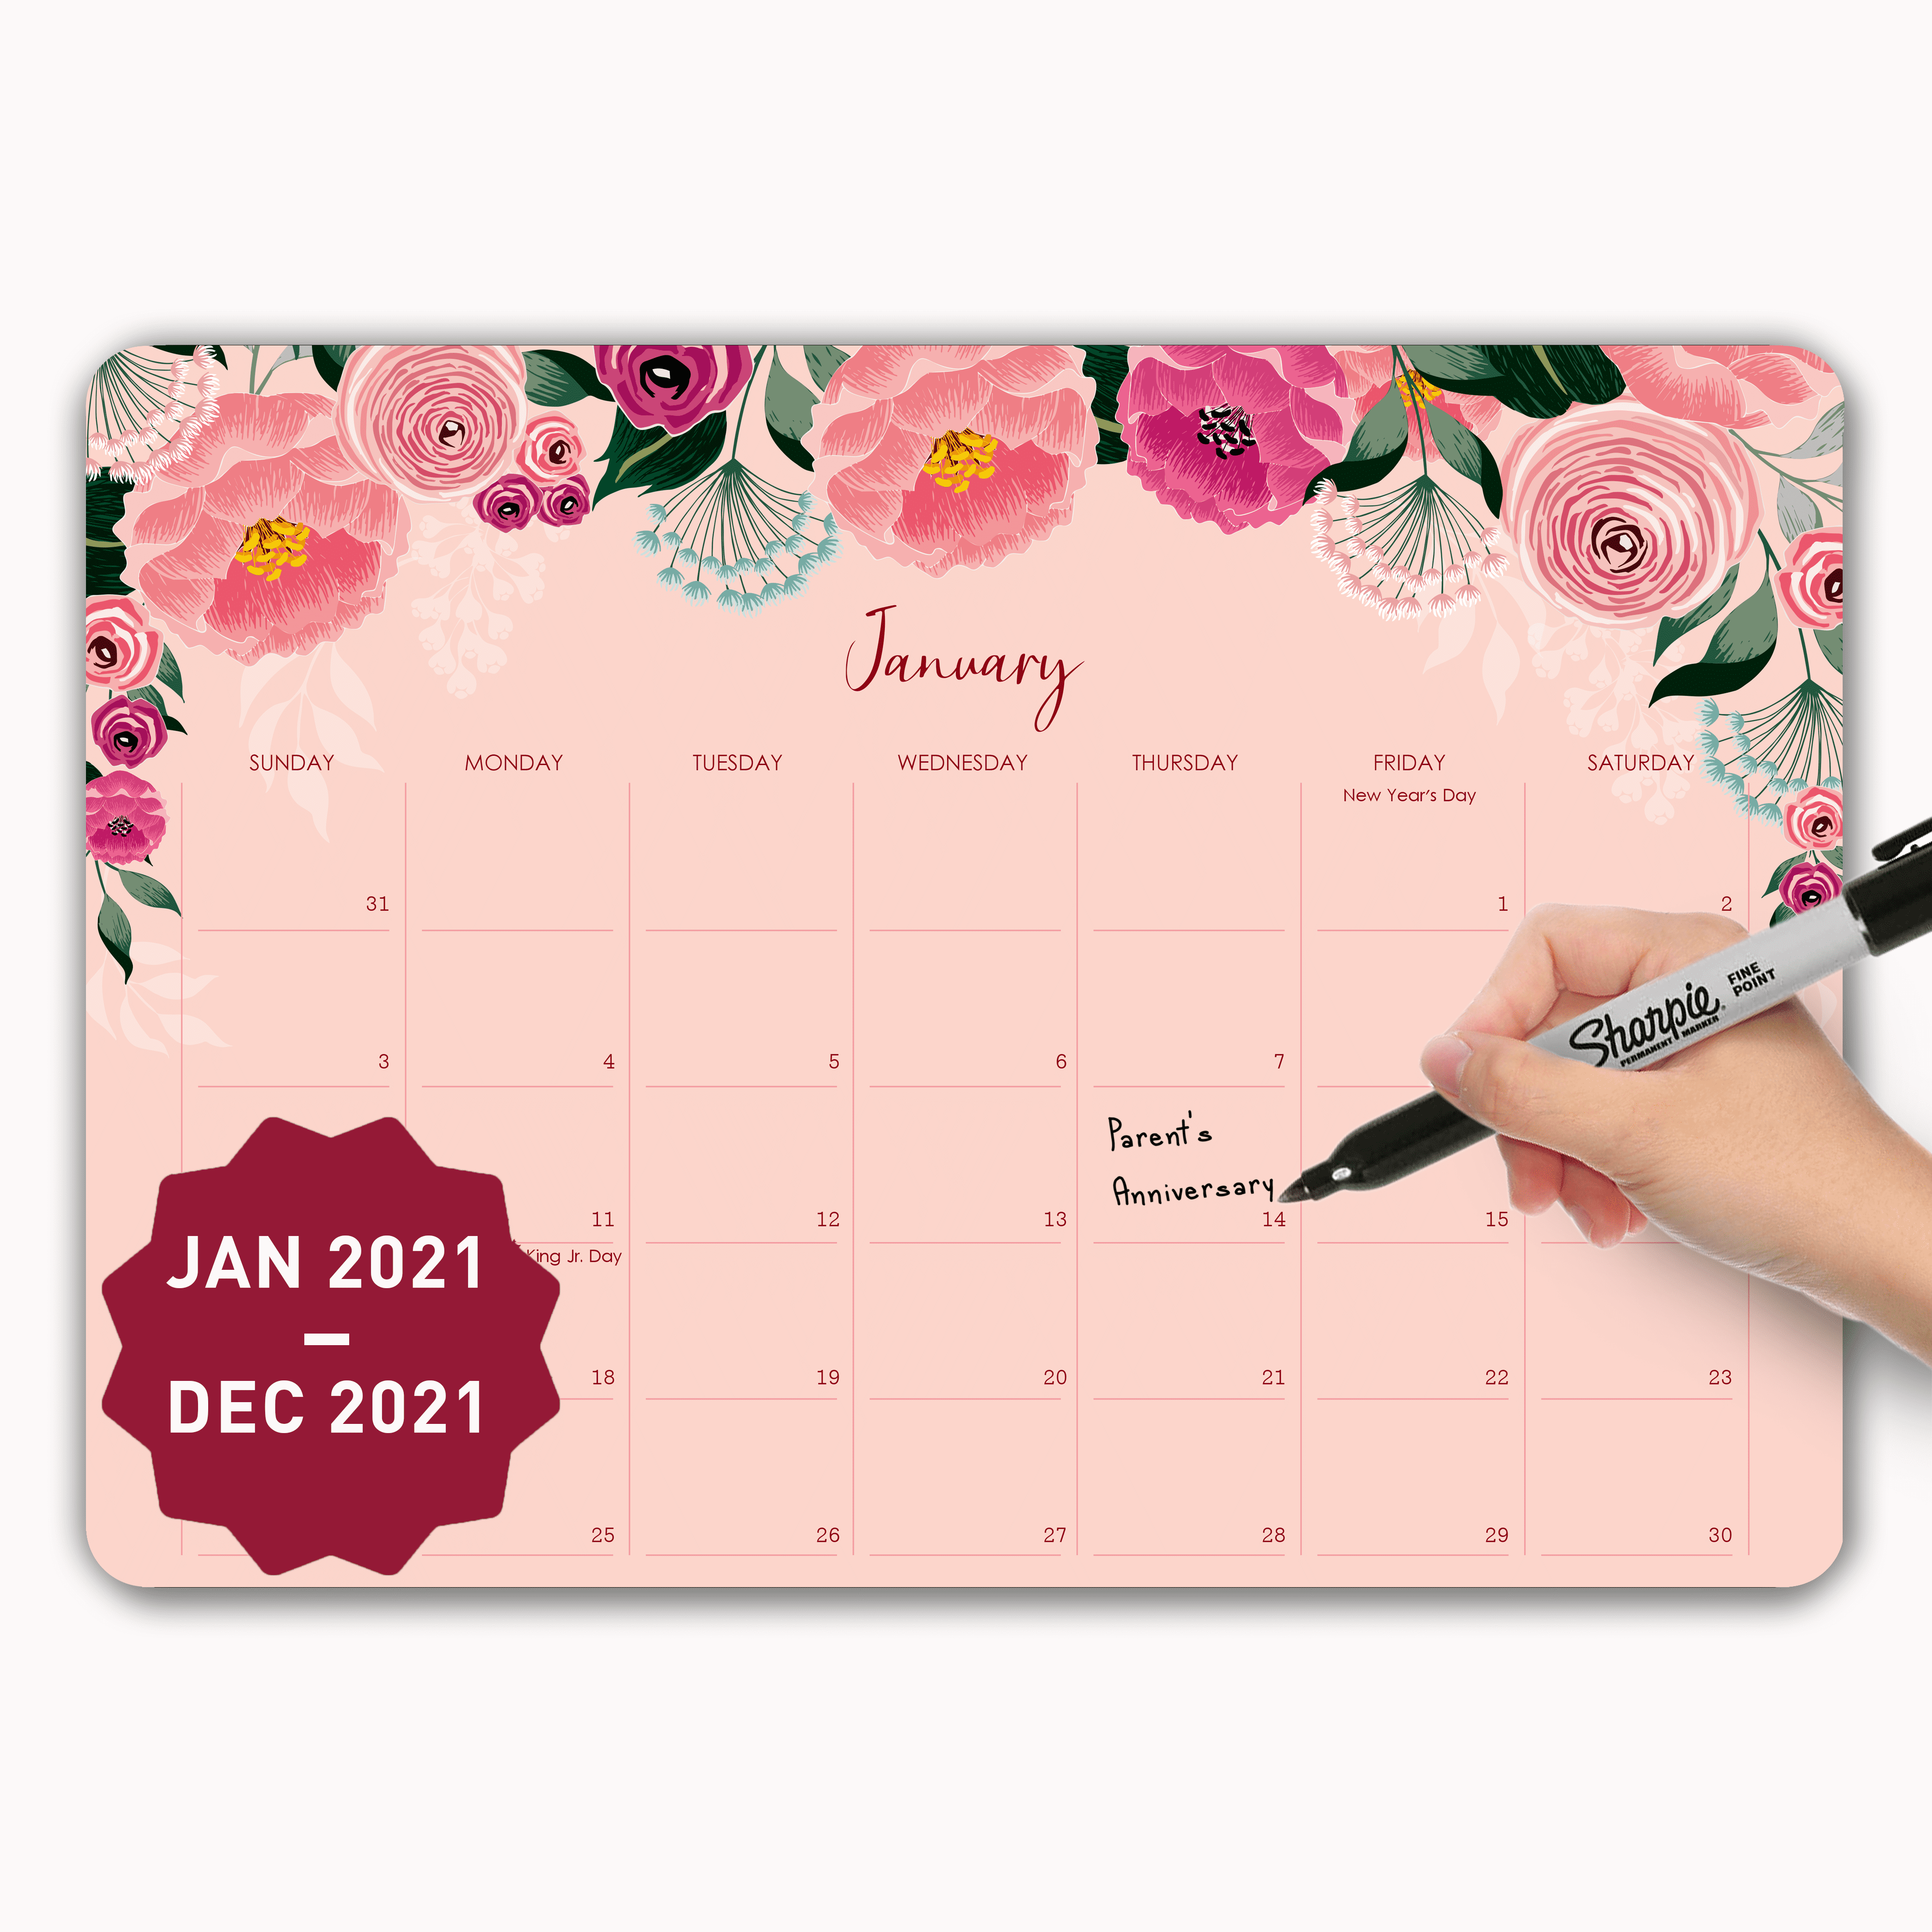 MUDRIT 2021 Desk/Wall Yearly Calendar Large Pages 12 X 17 Monthly Planner